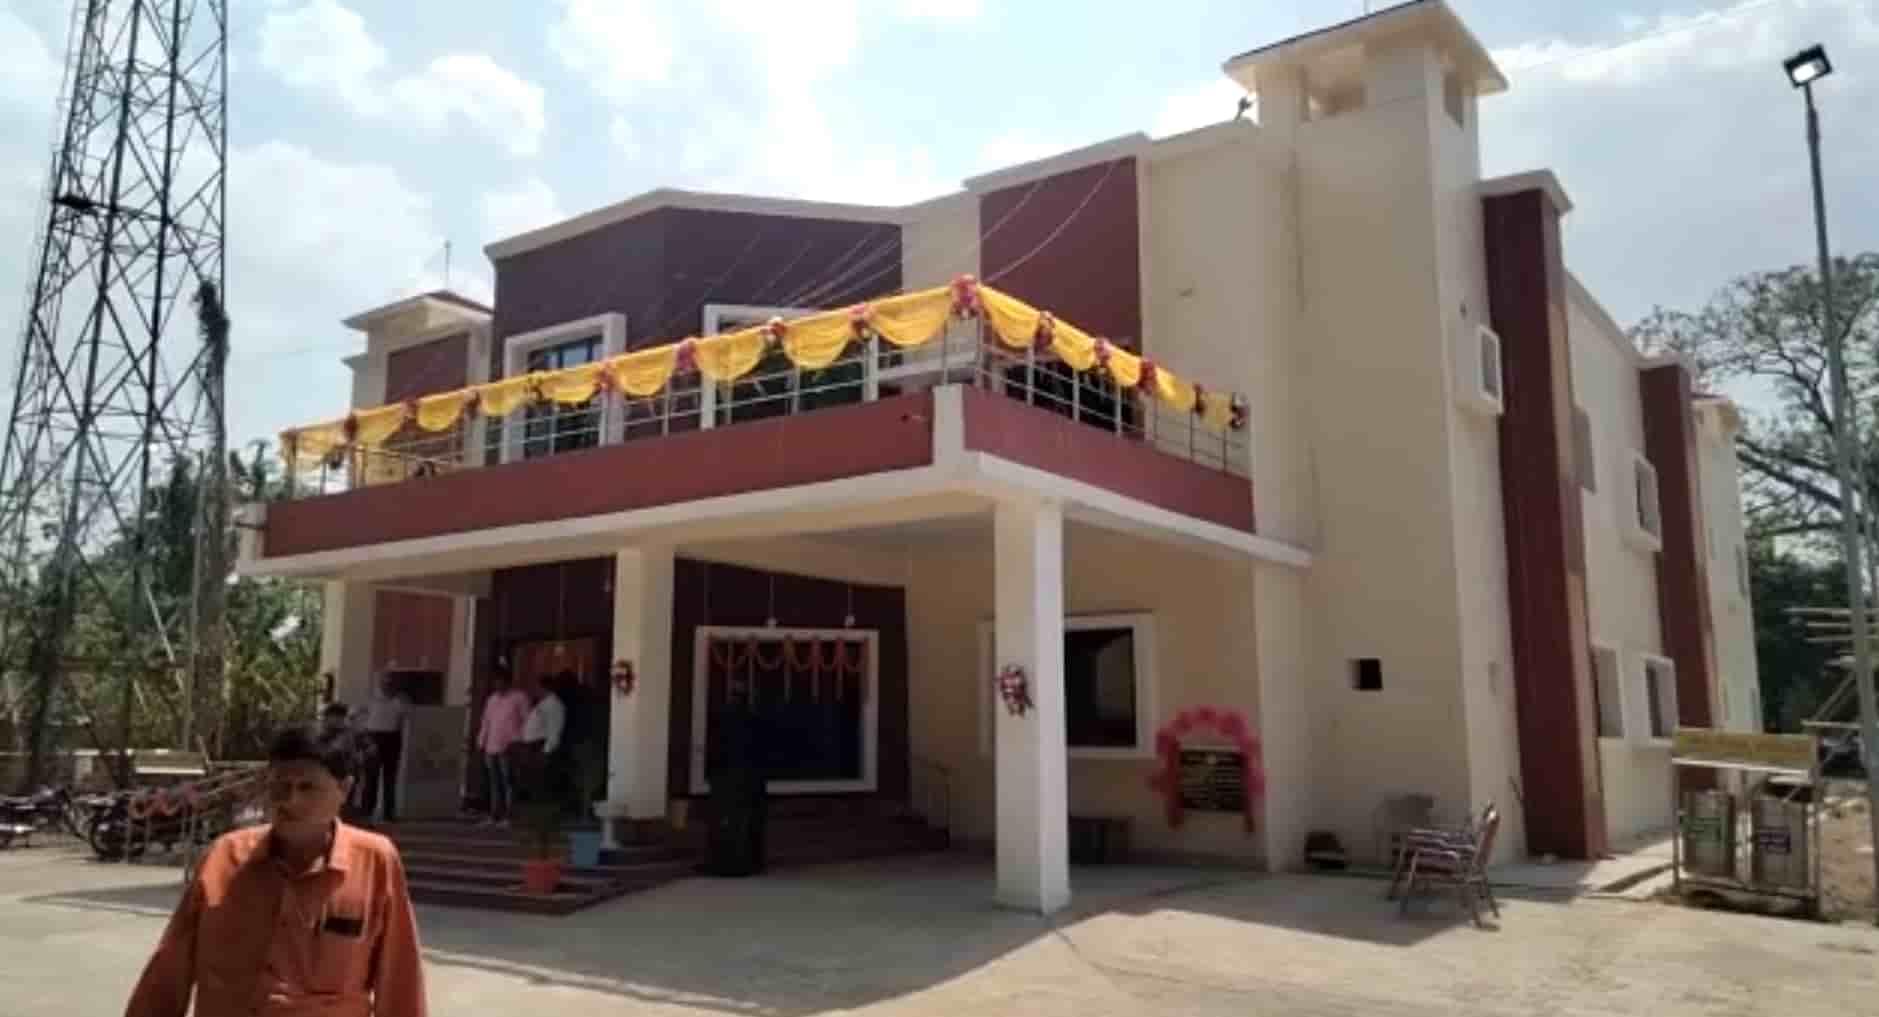 adityapur new ps 1 The state of the art Adityapur Police Station in Seraikela equipped with the latest facilities opens to the public marking a step towards hi tech policing Town Post